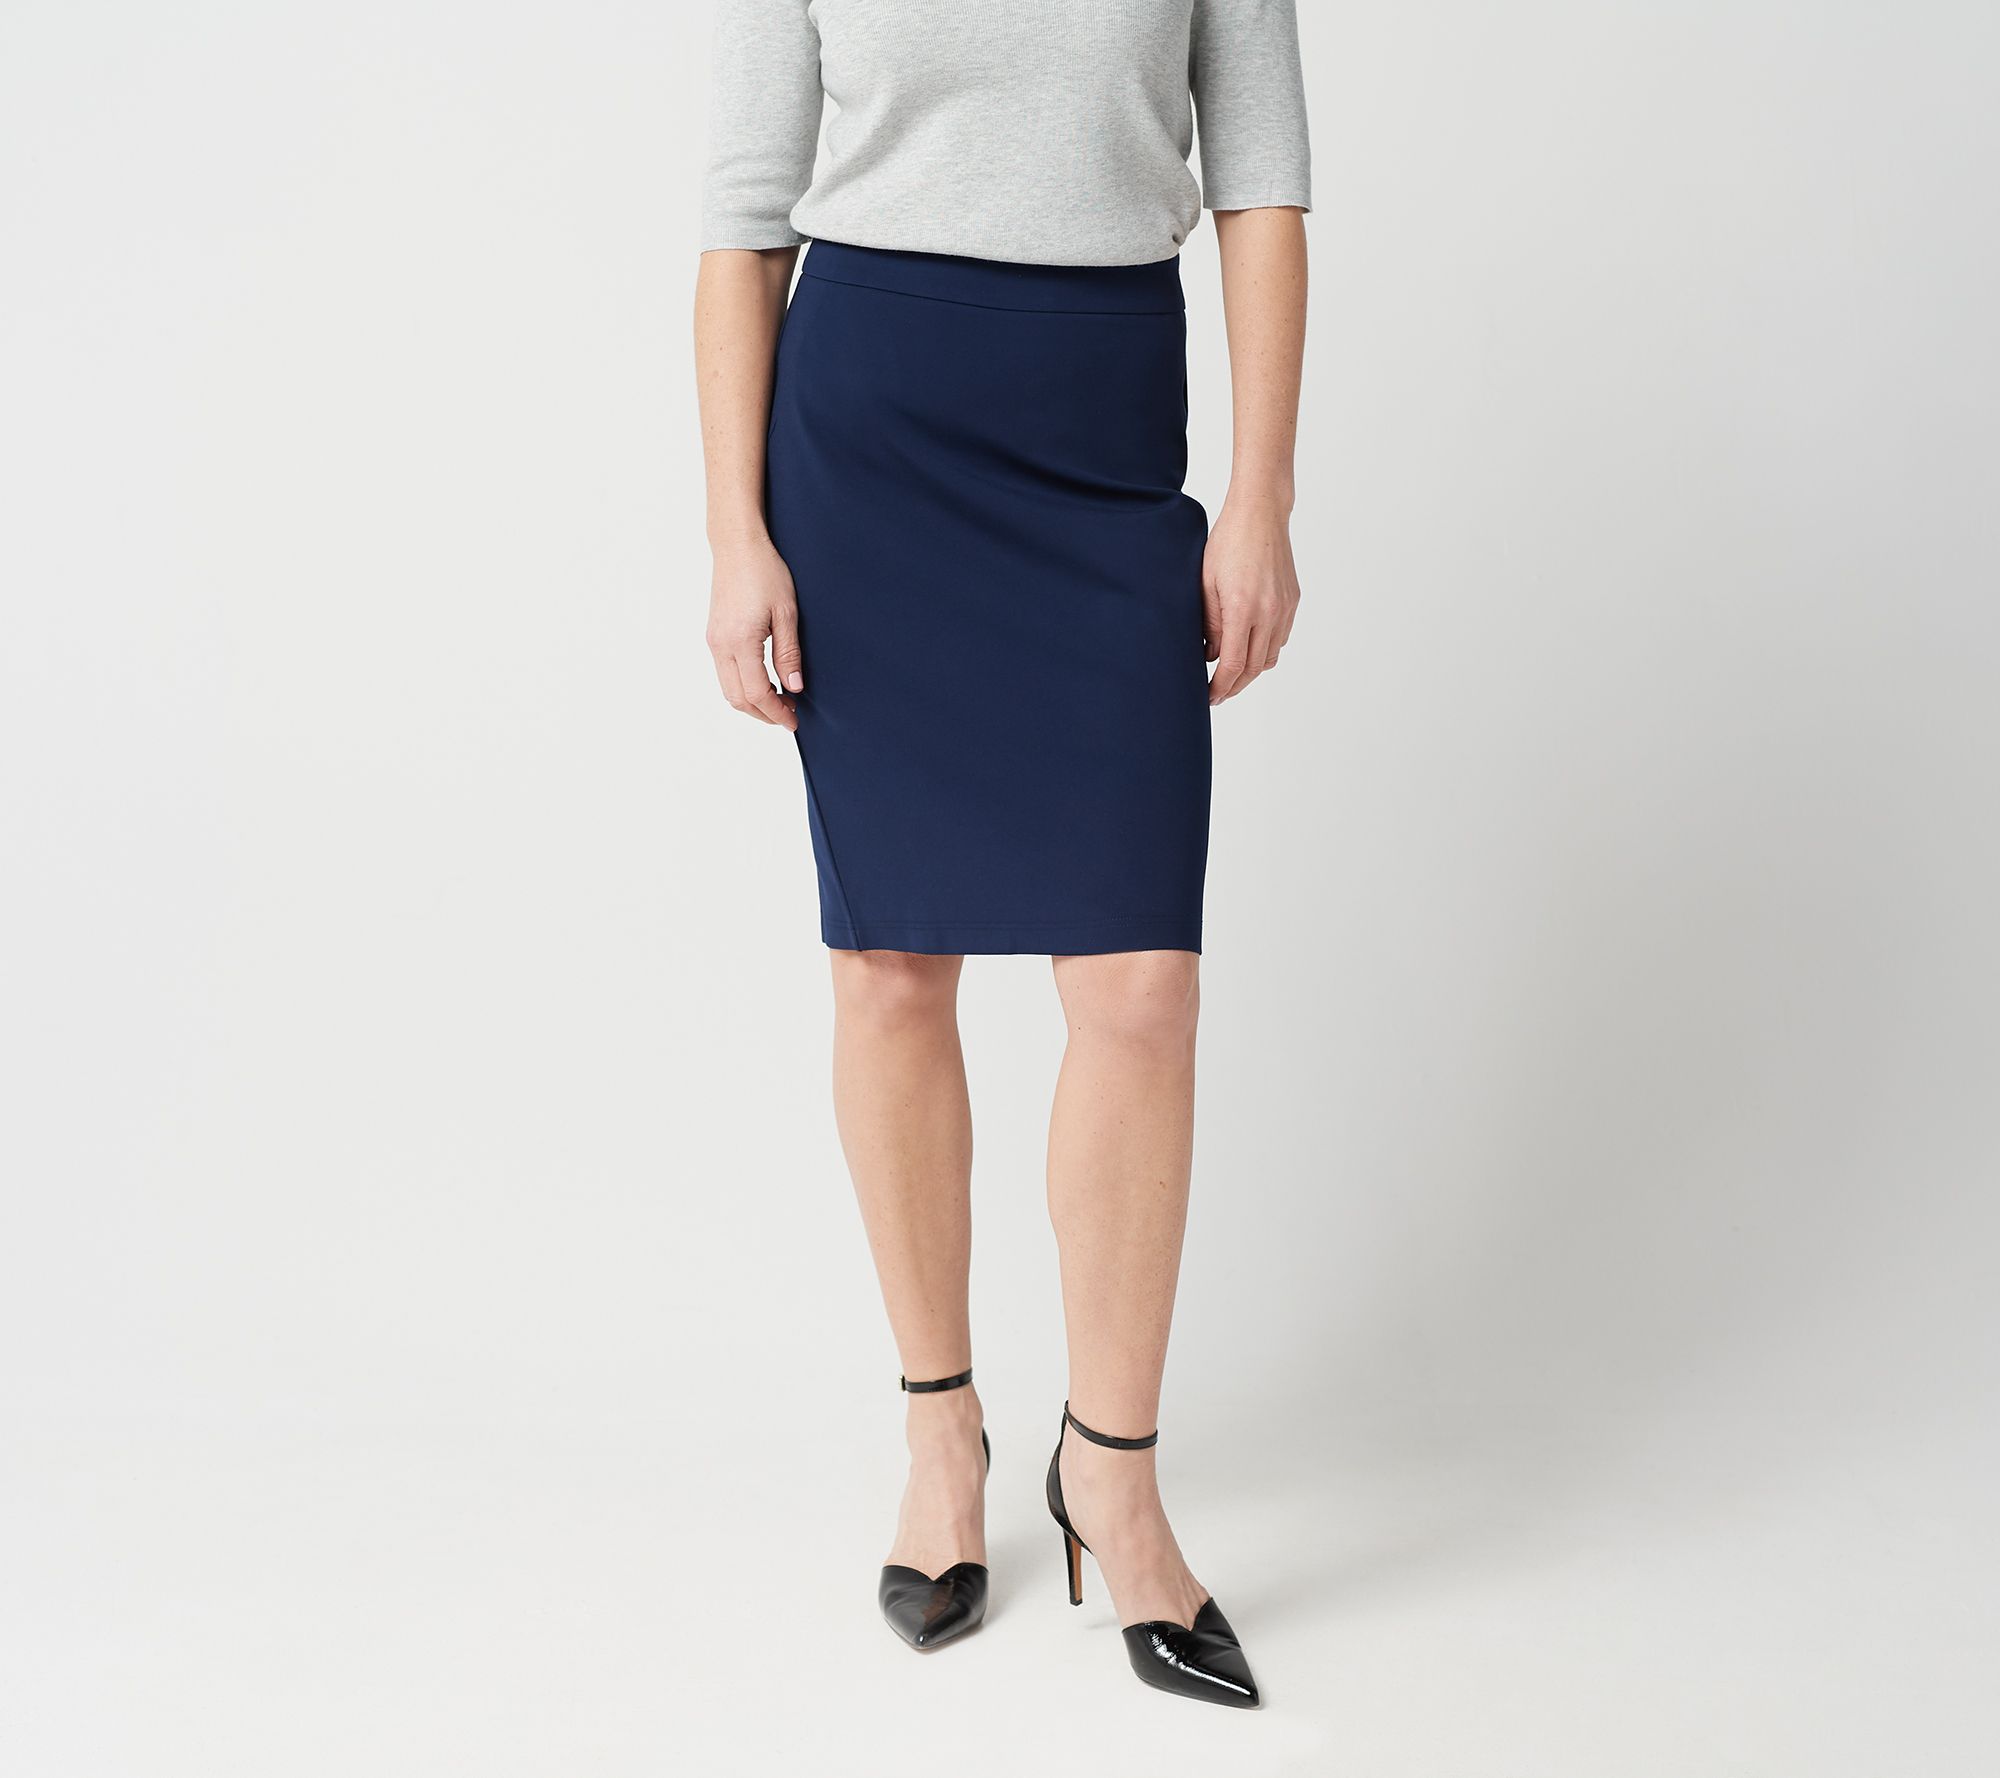 Linea by Louis Dell'Olio Super Ponte Knit Pull-On Skirt - QVC.com